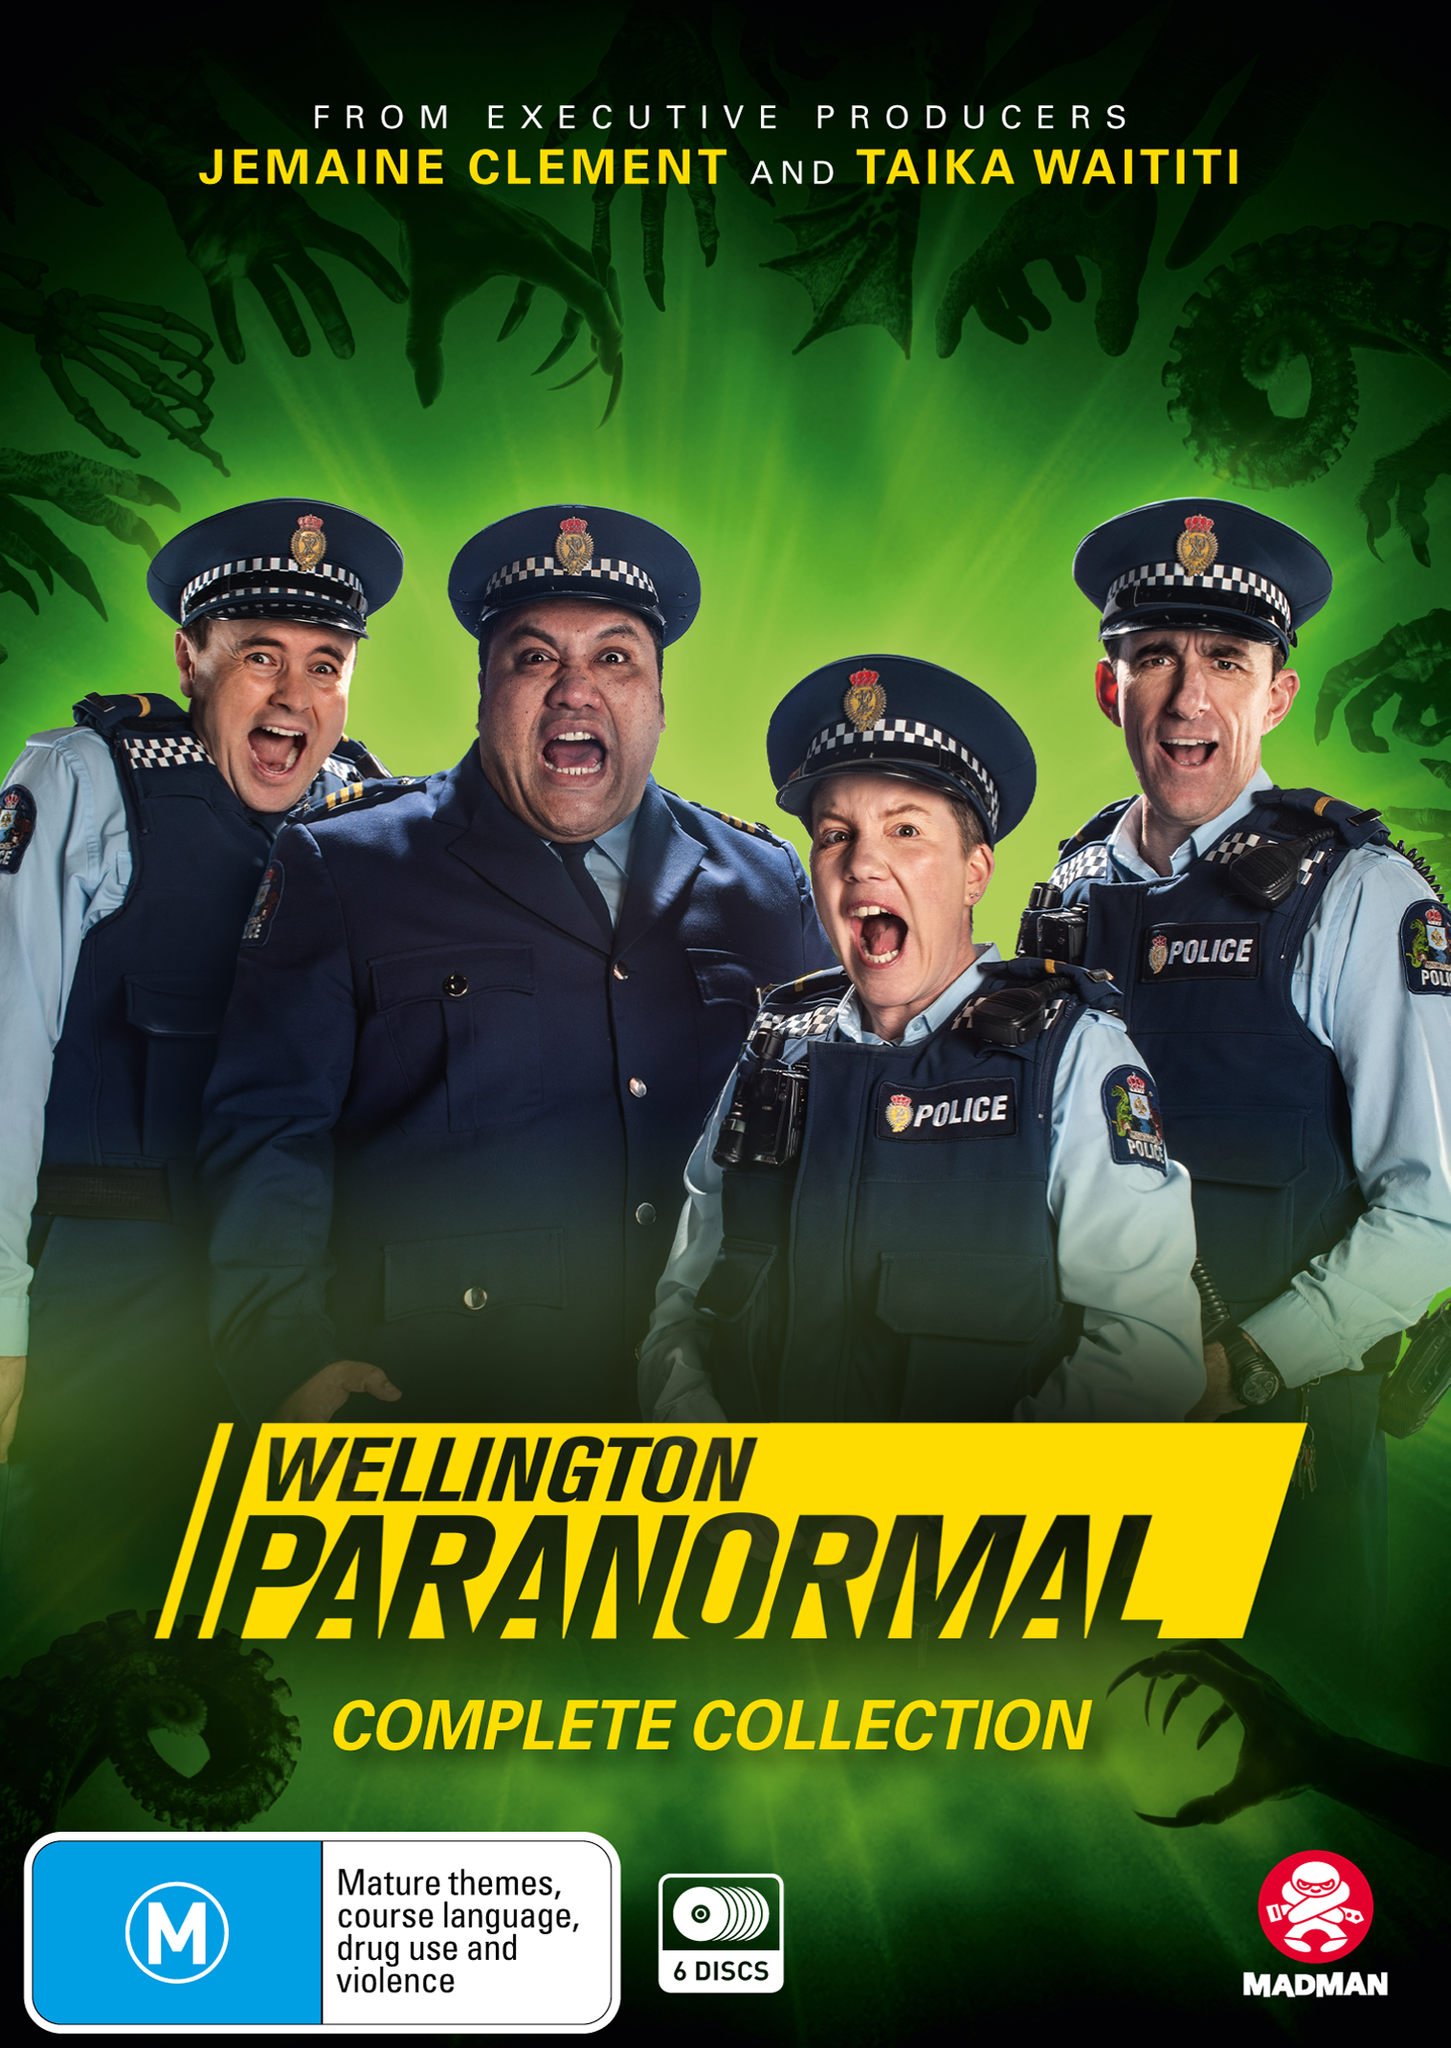 WELLINGTON PARANORMAL COMPLETE COLLECTION